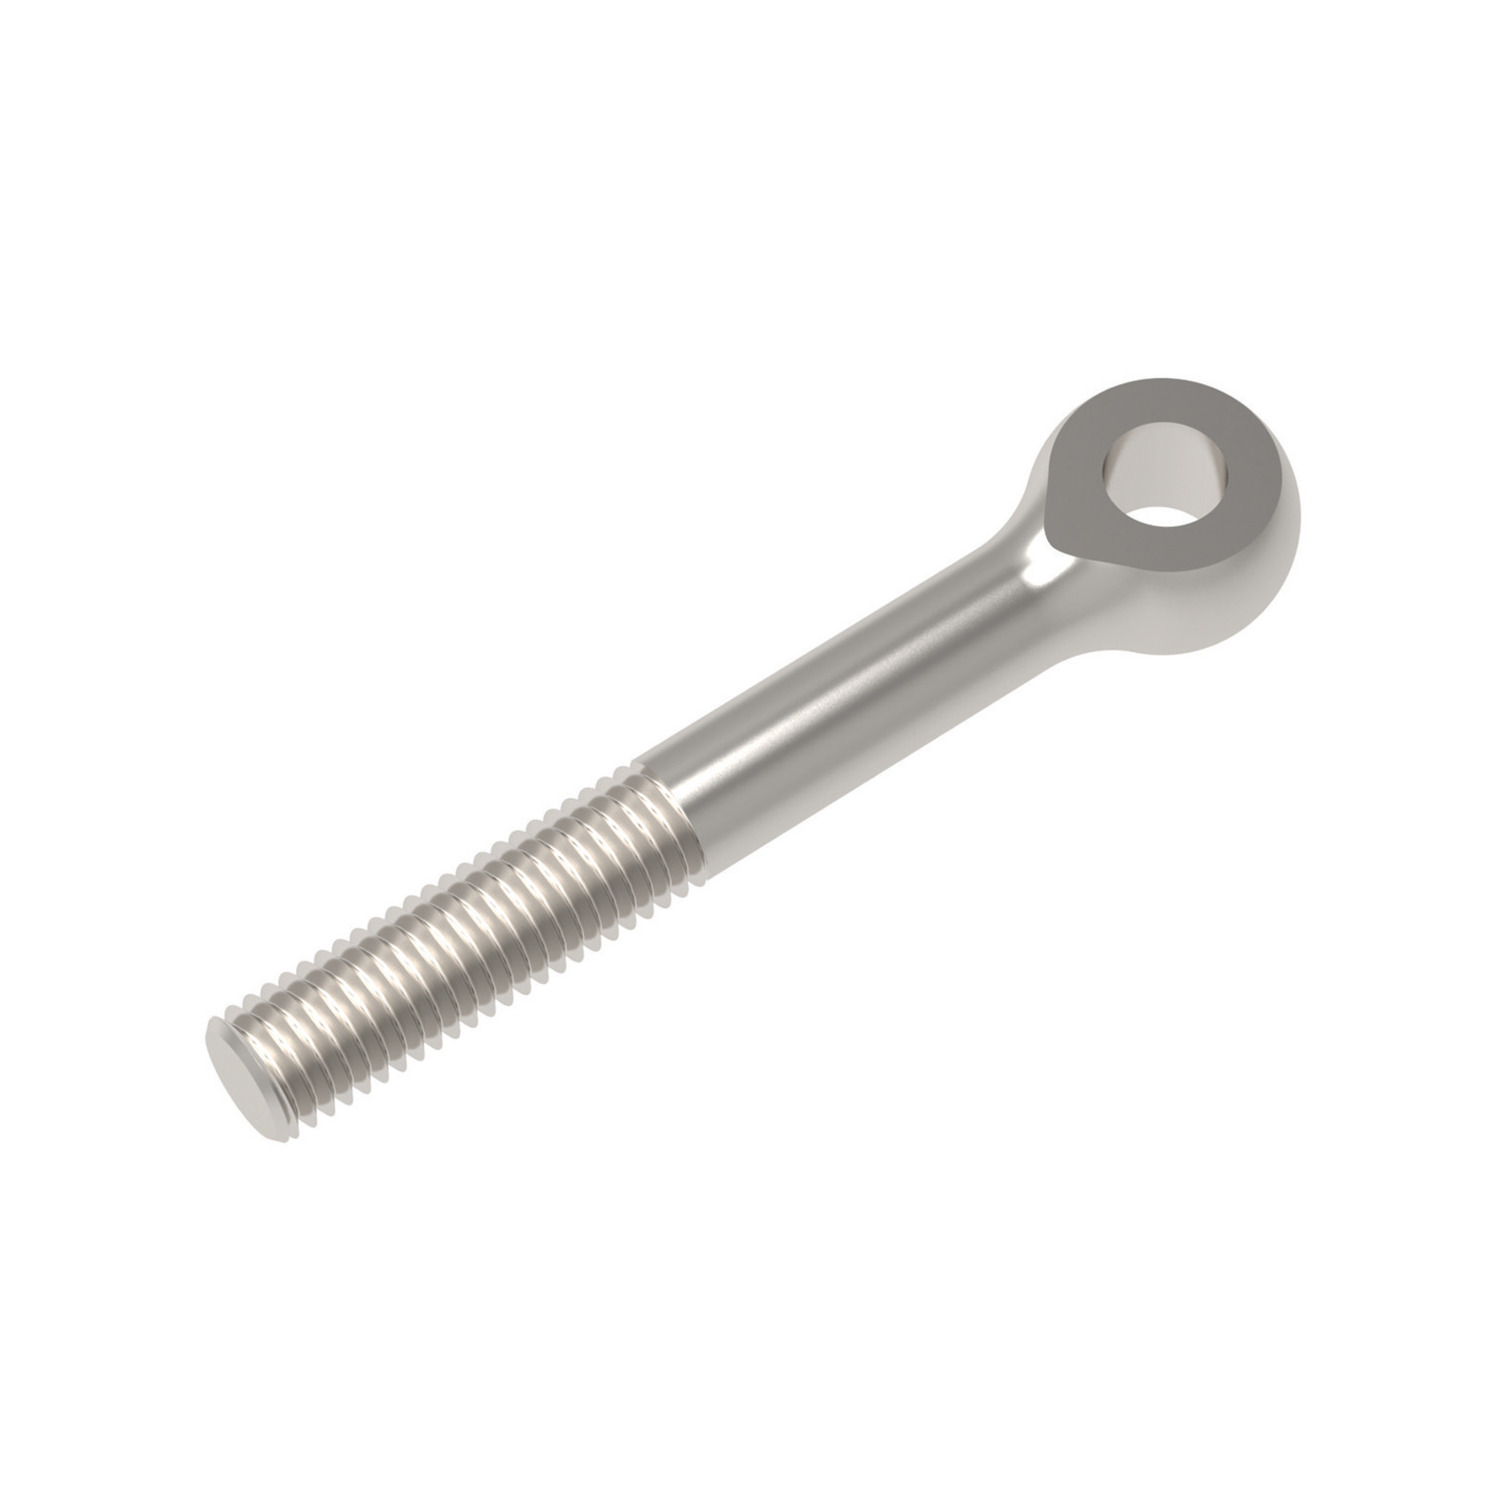 18830 - Stainless Swing Bolts